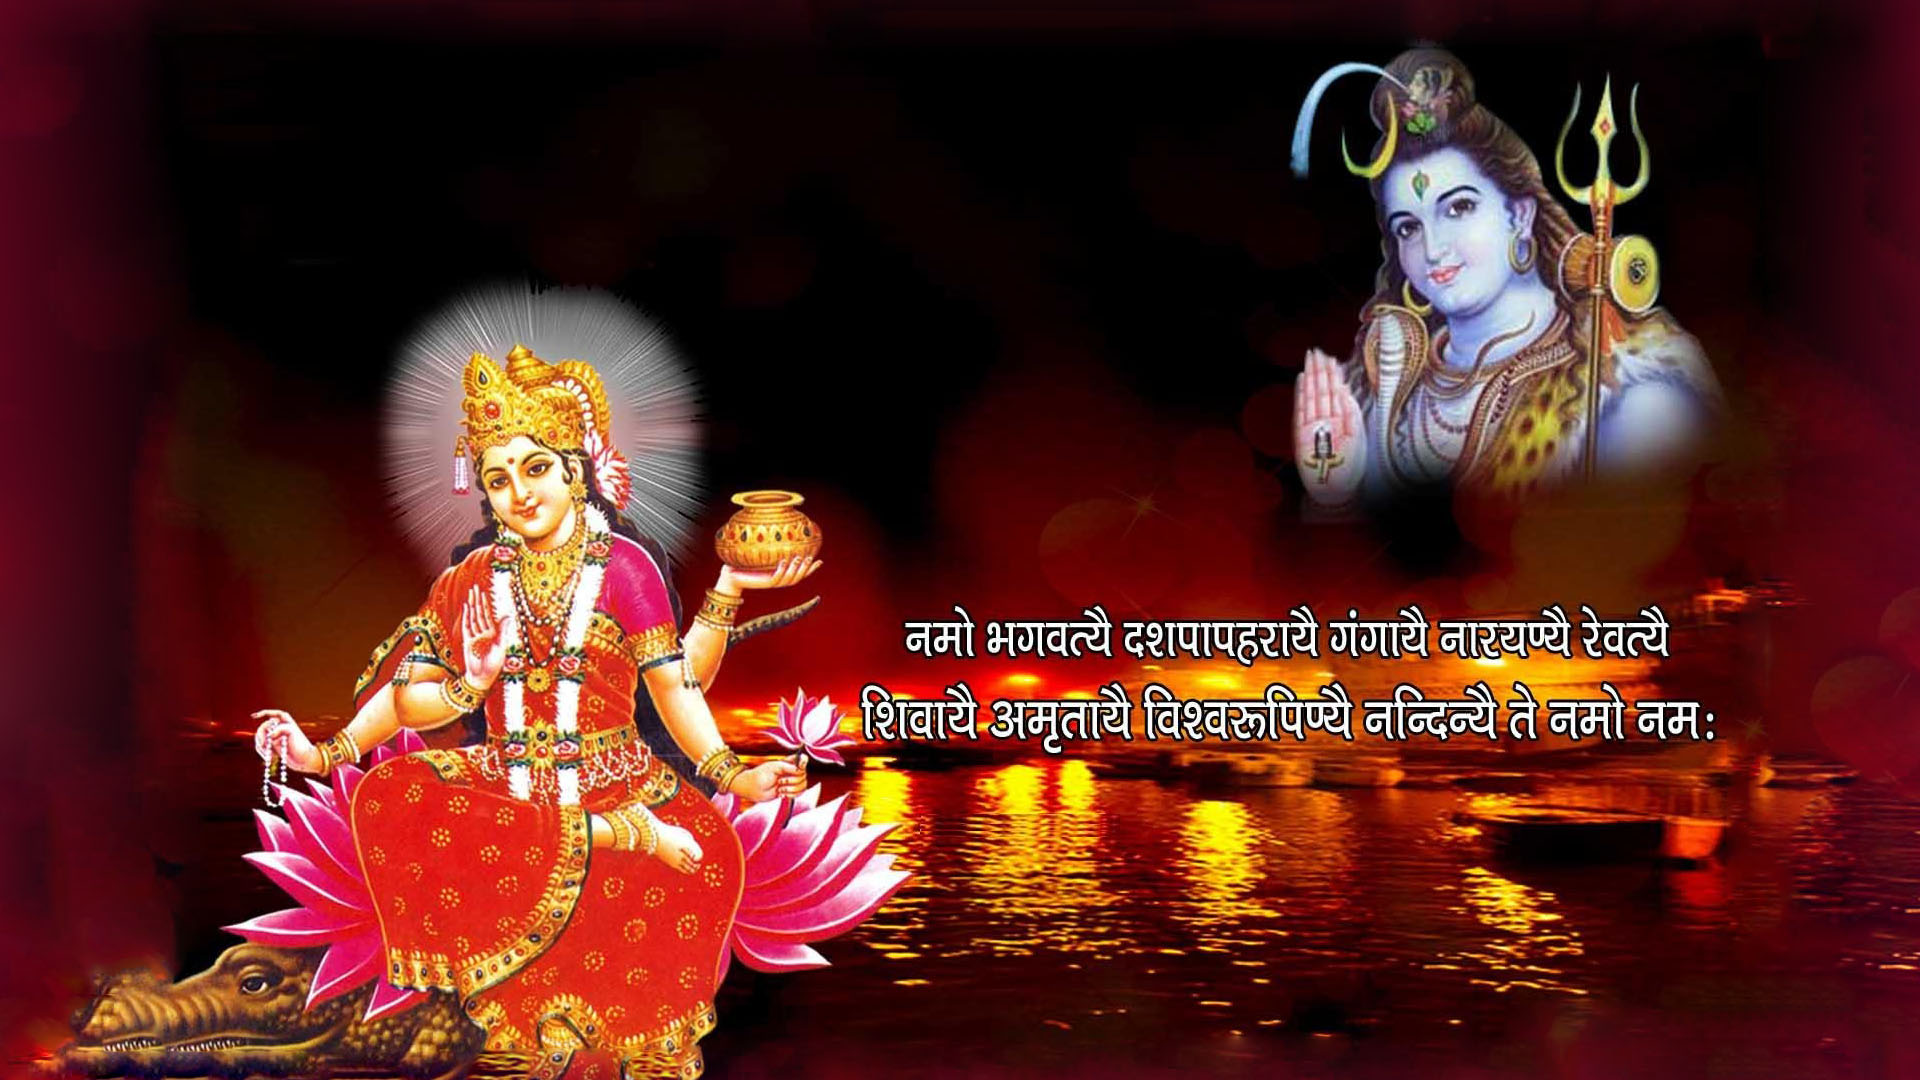 Download Jatadhari images, pictures and wallpapers | Sri Ram Wallpapers